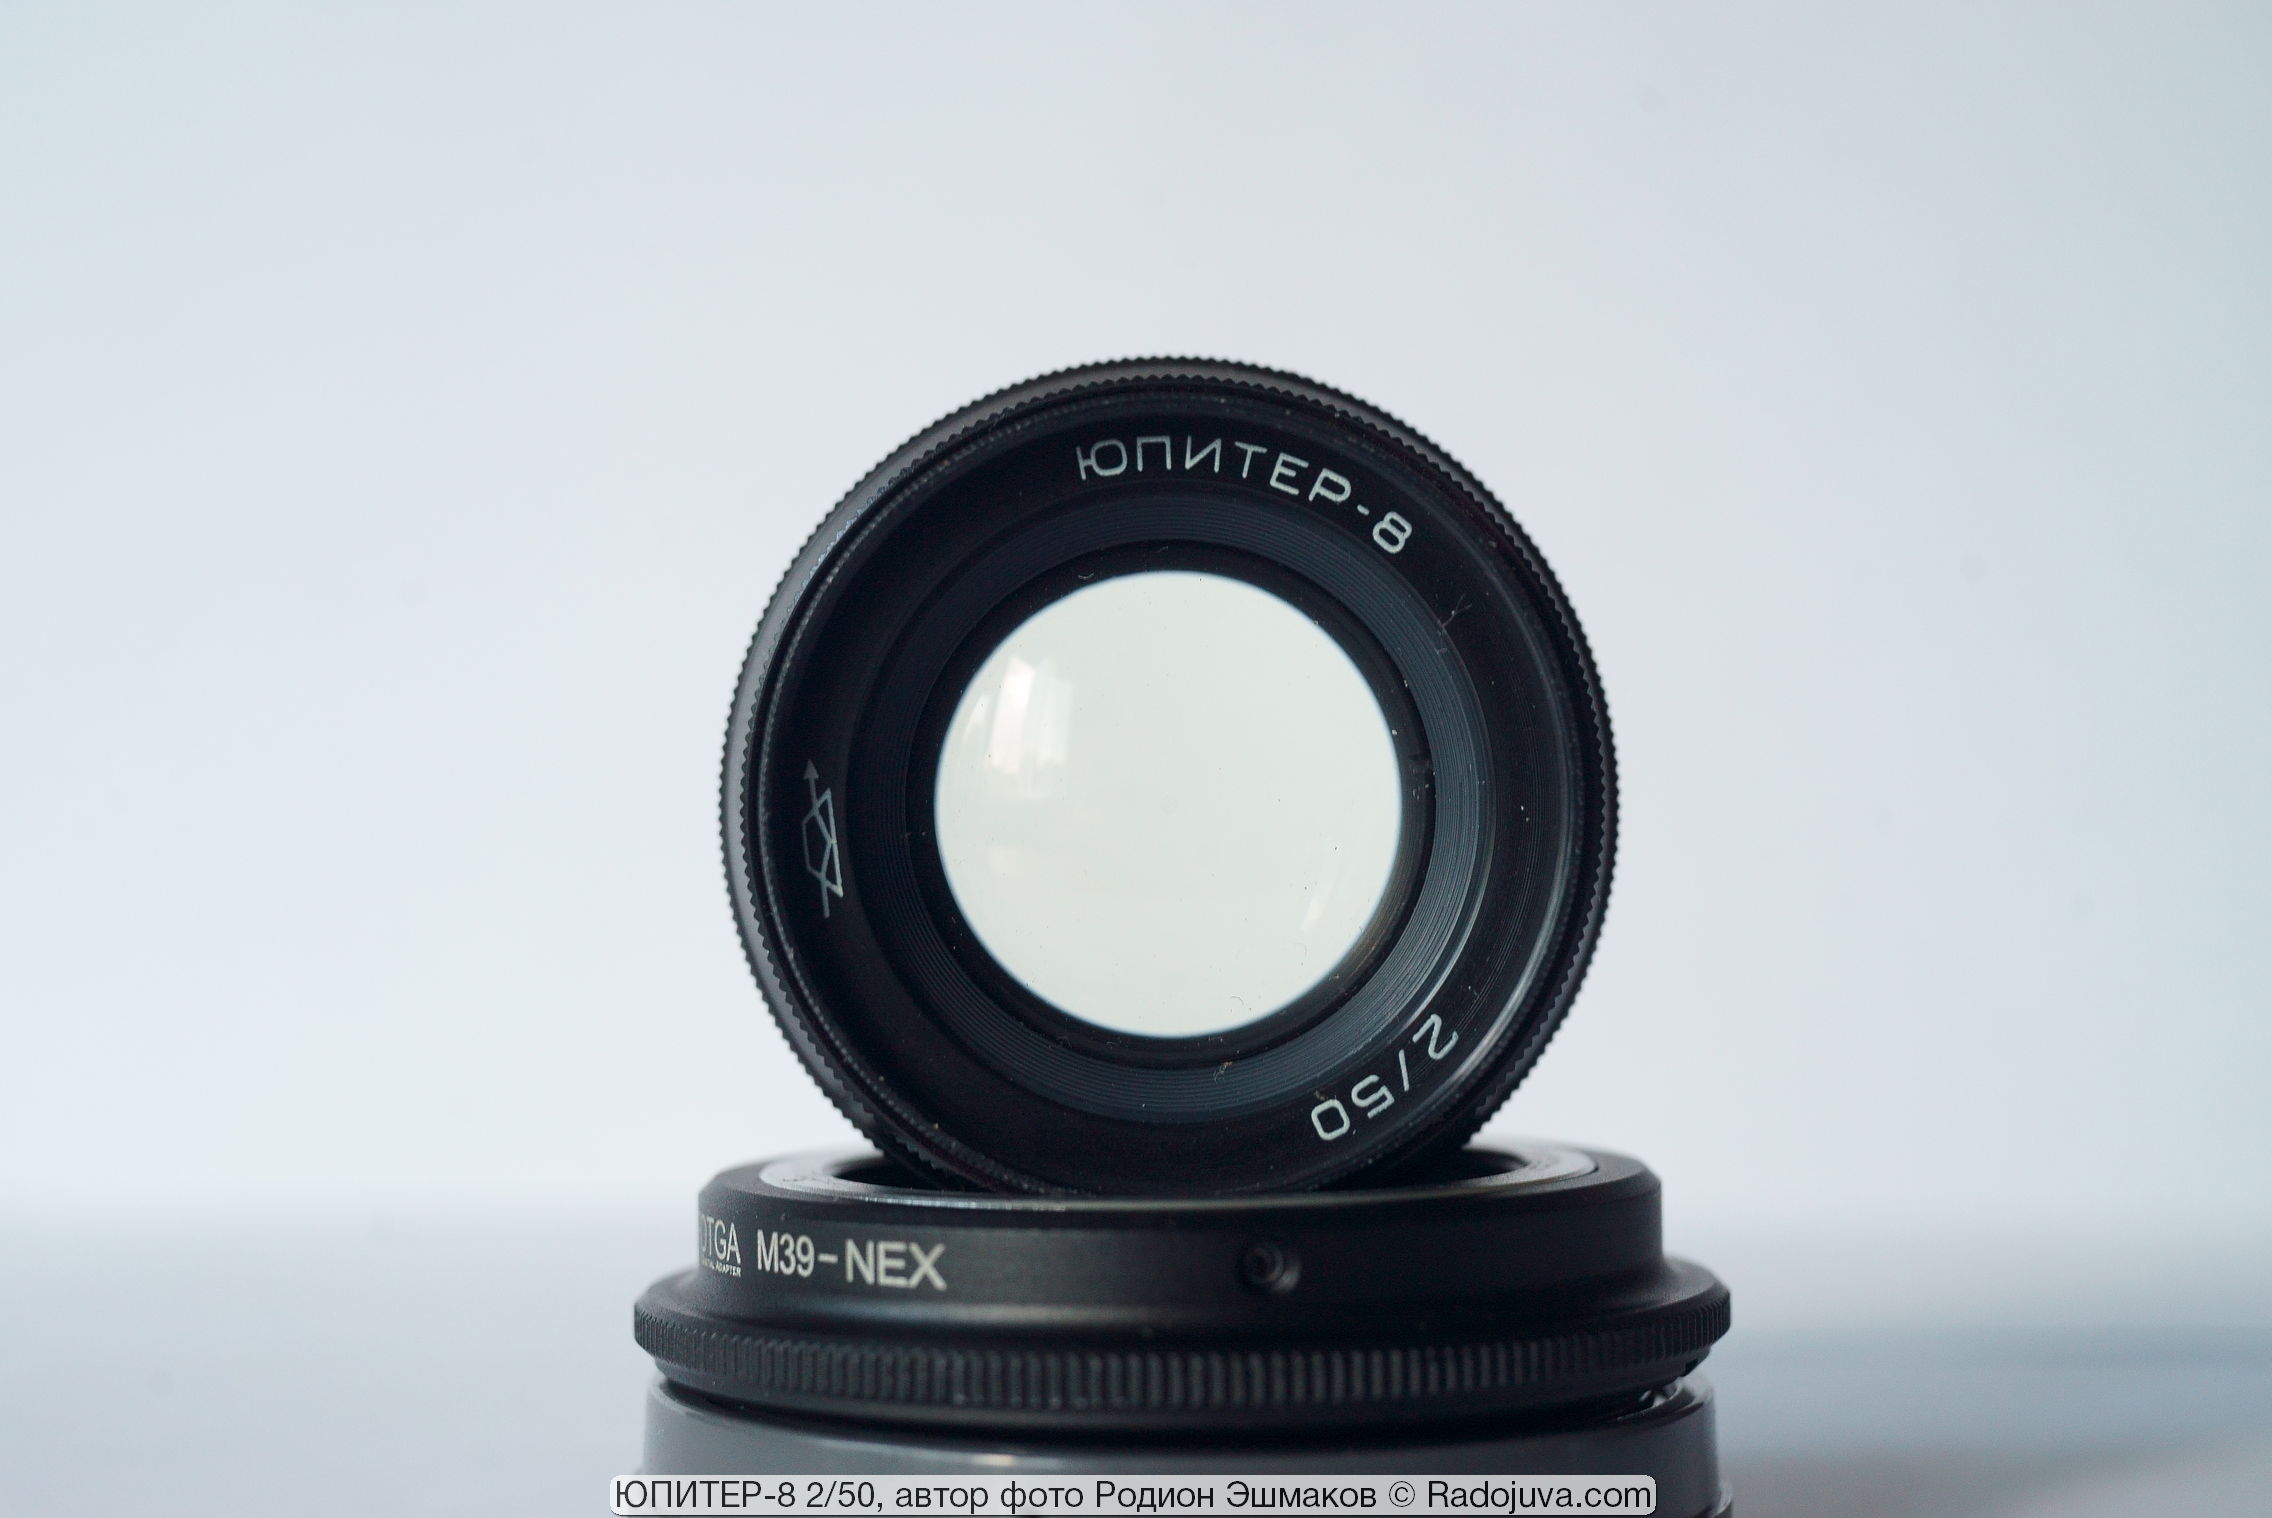 The entrance pupil of the lens with an open aperture.